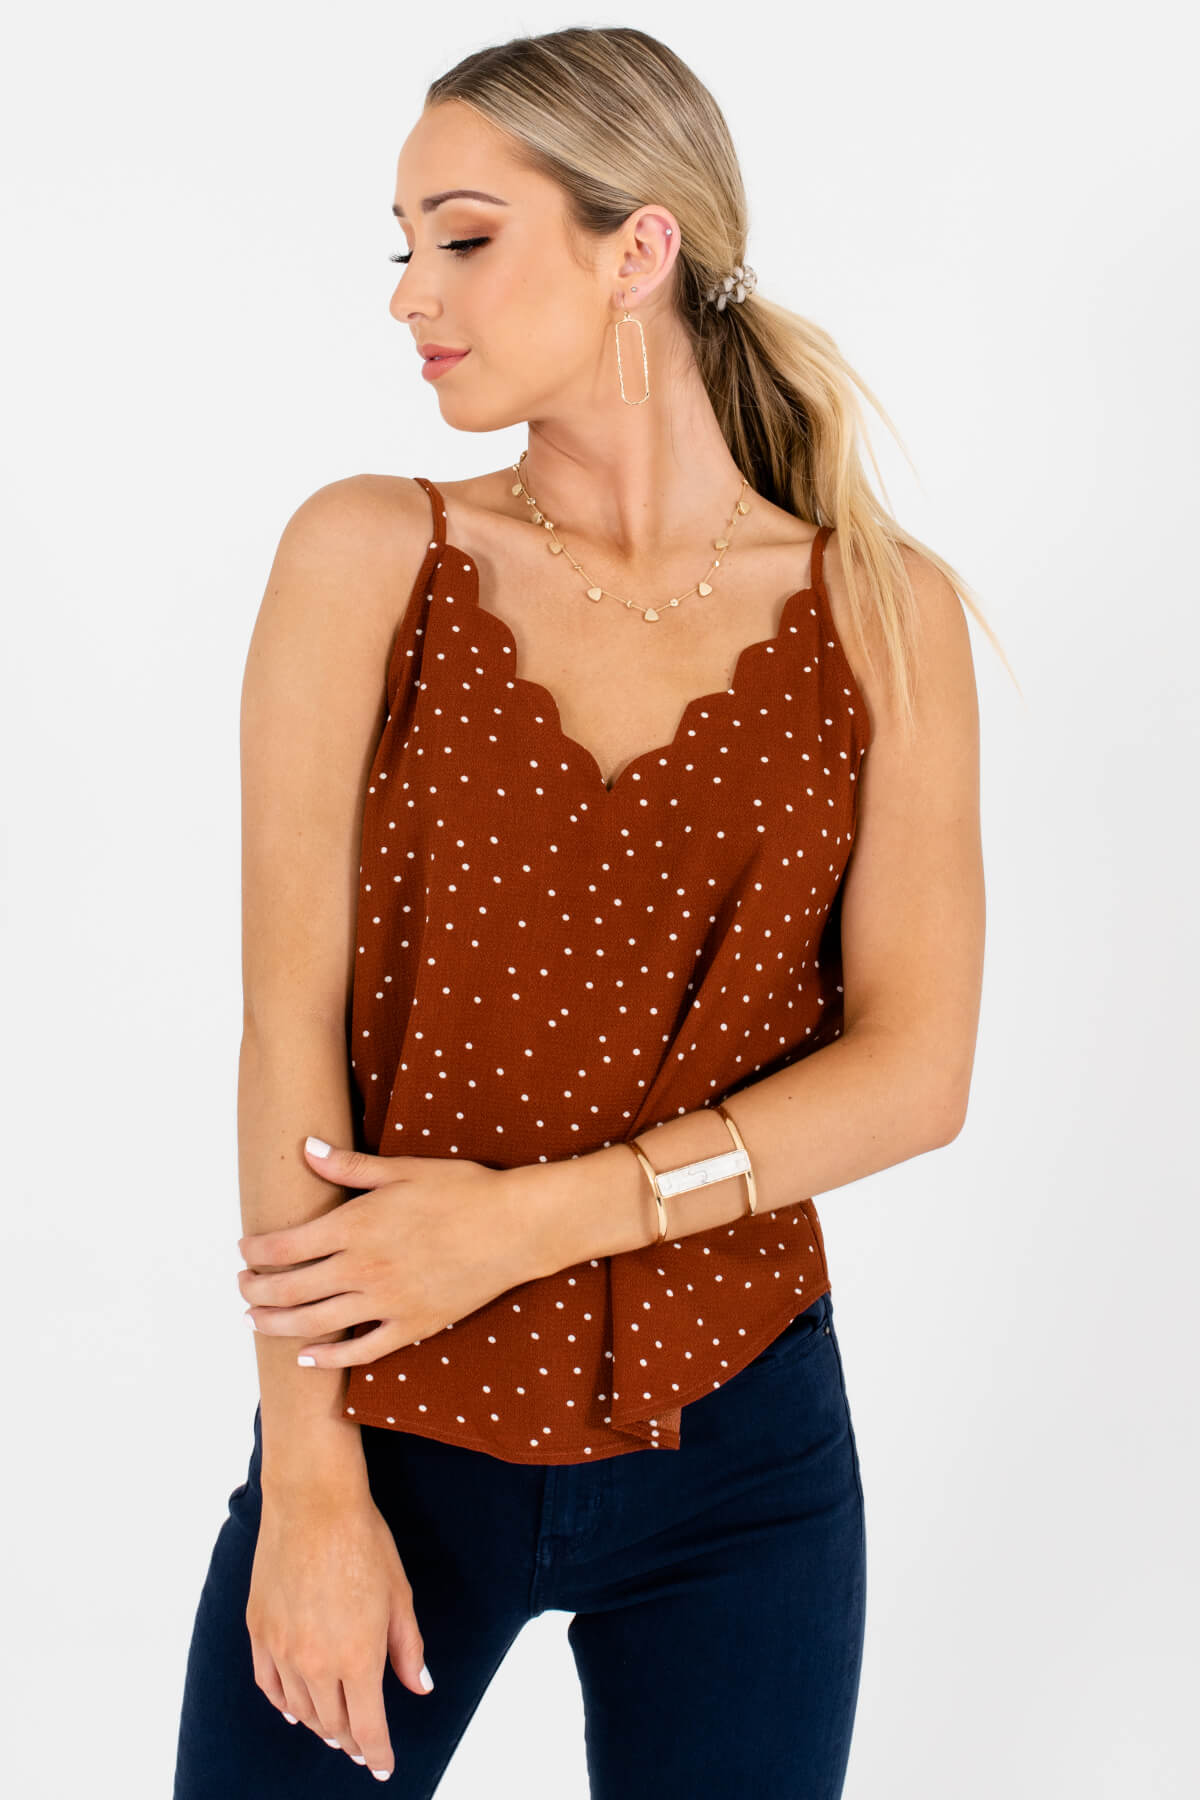 Rust Brown Polka Dot Tank Tops with Scalloped Neckline